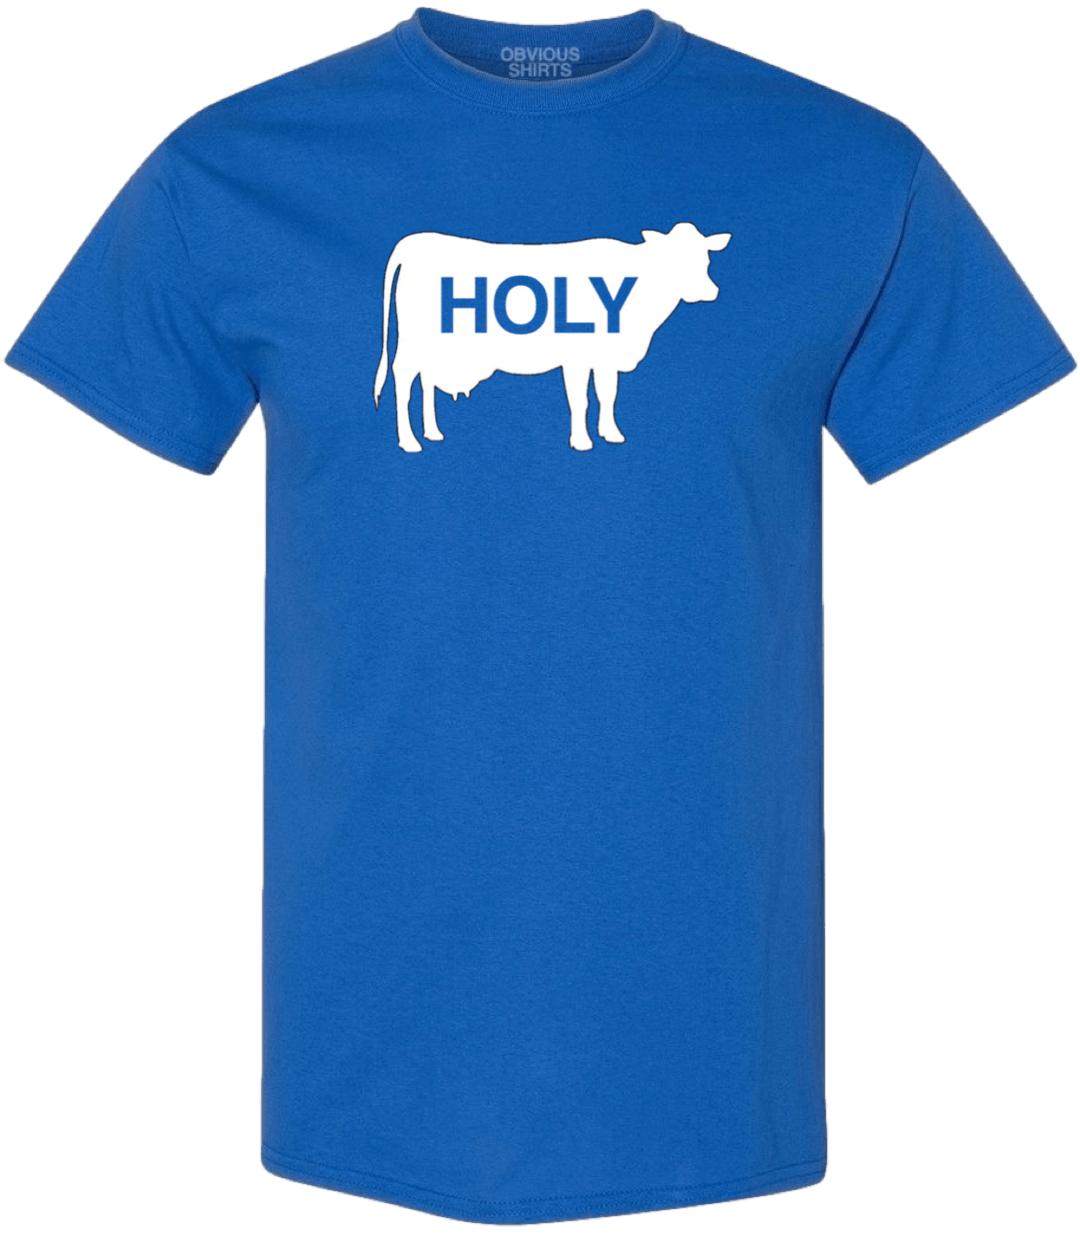 HOLY COW. (BIG & TALL) - OBVIOUS SHIRTS.